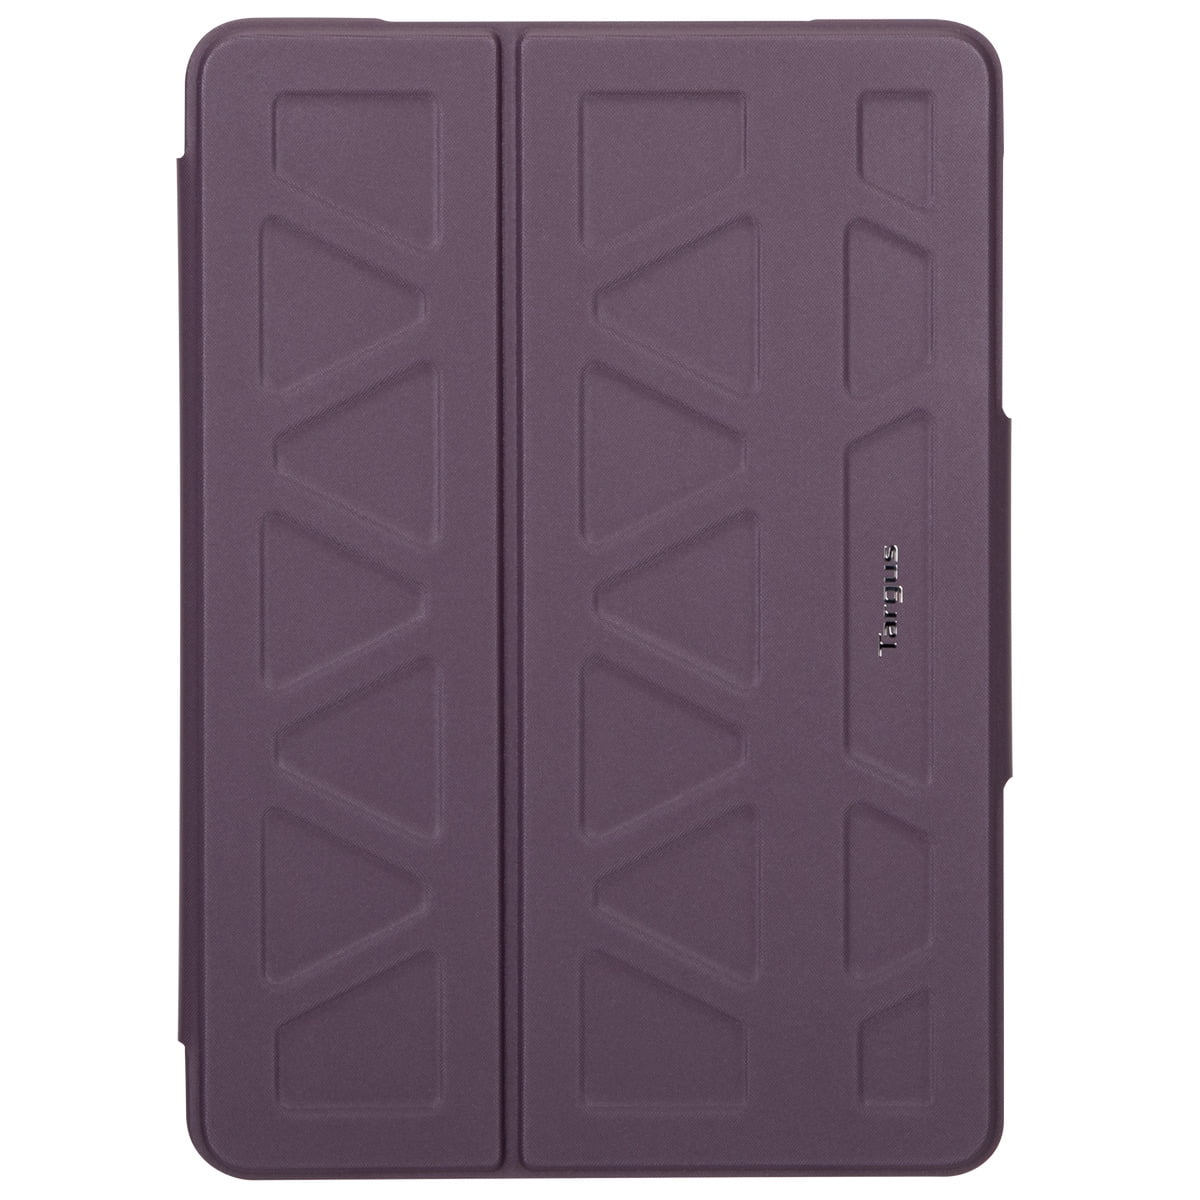 Pro-Tek Antimicrobial Case for iPad (9th, 8th, and 7th gen.) 10.2-inch, THZ86007US, Purple